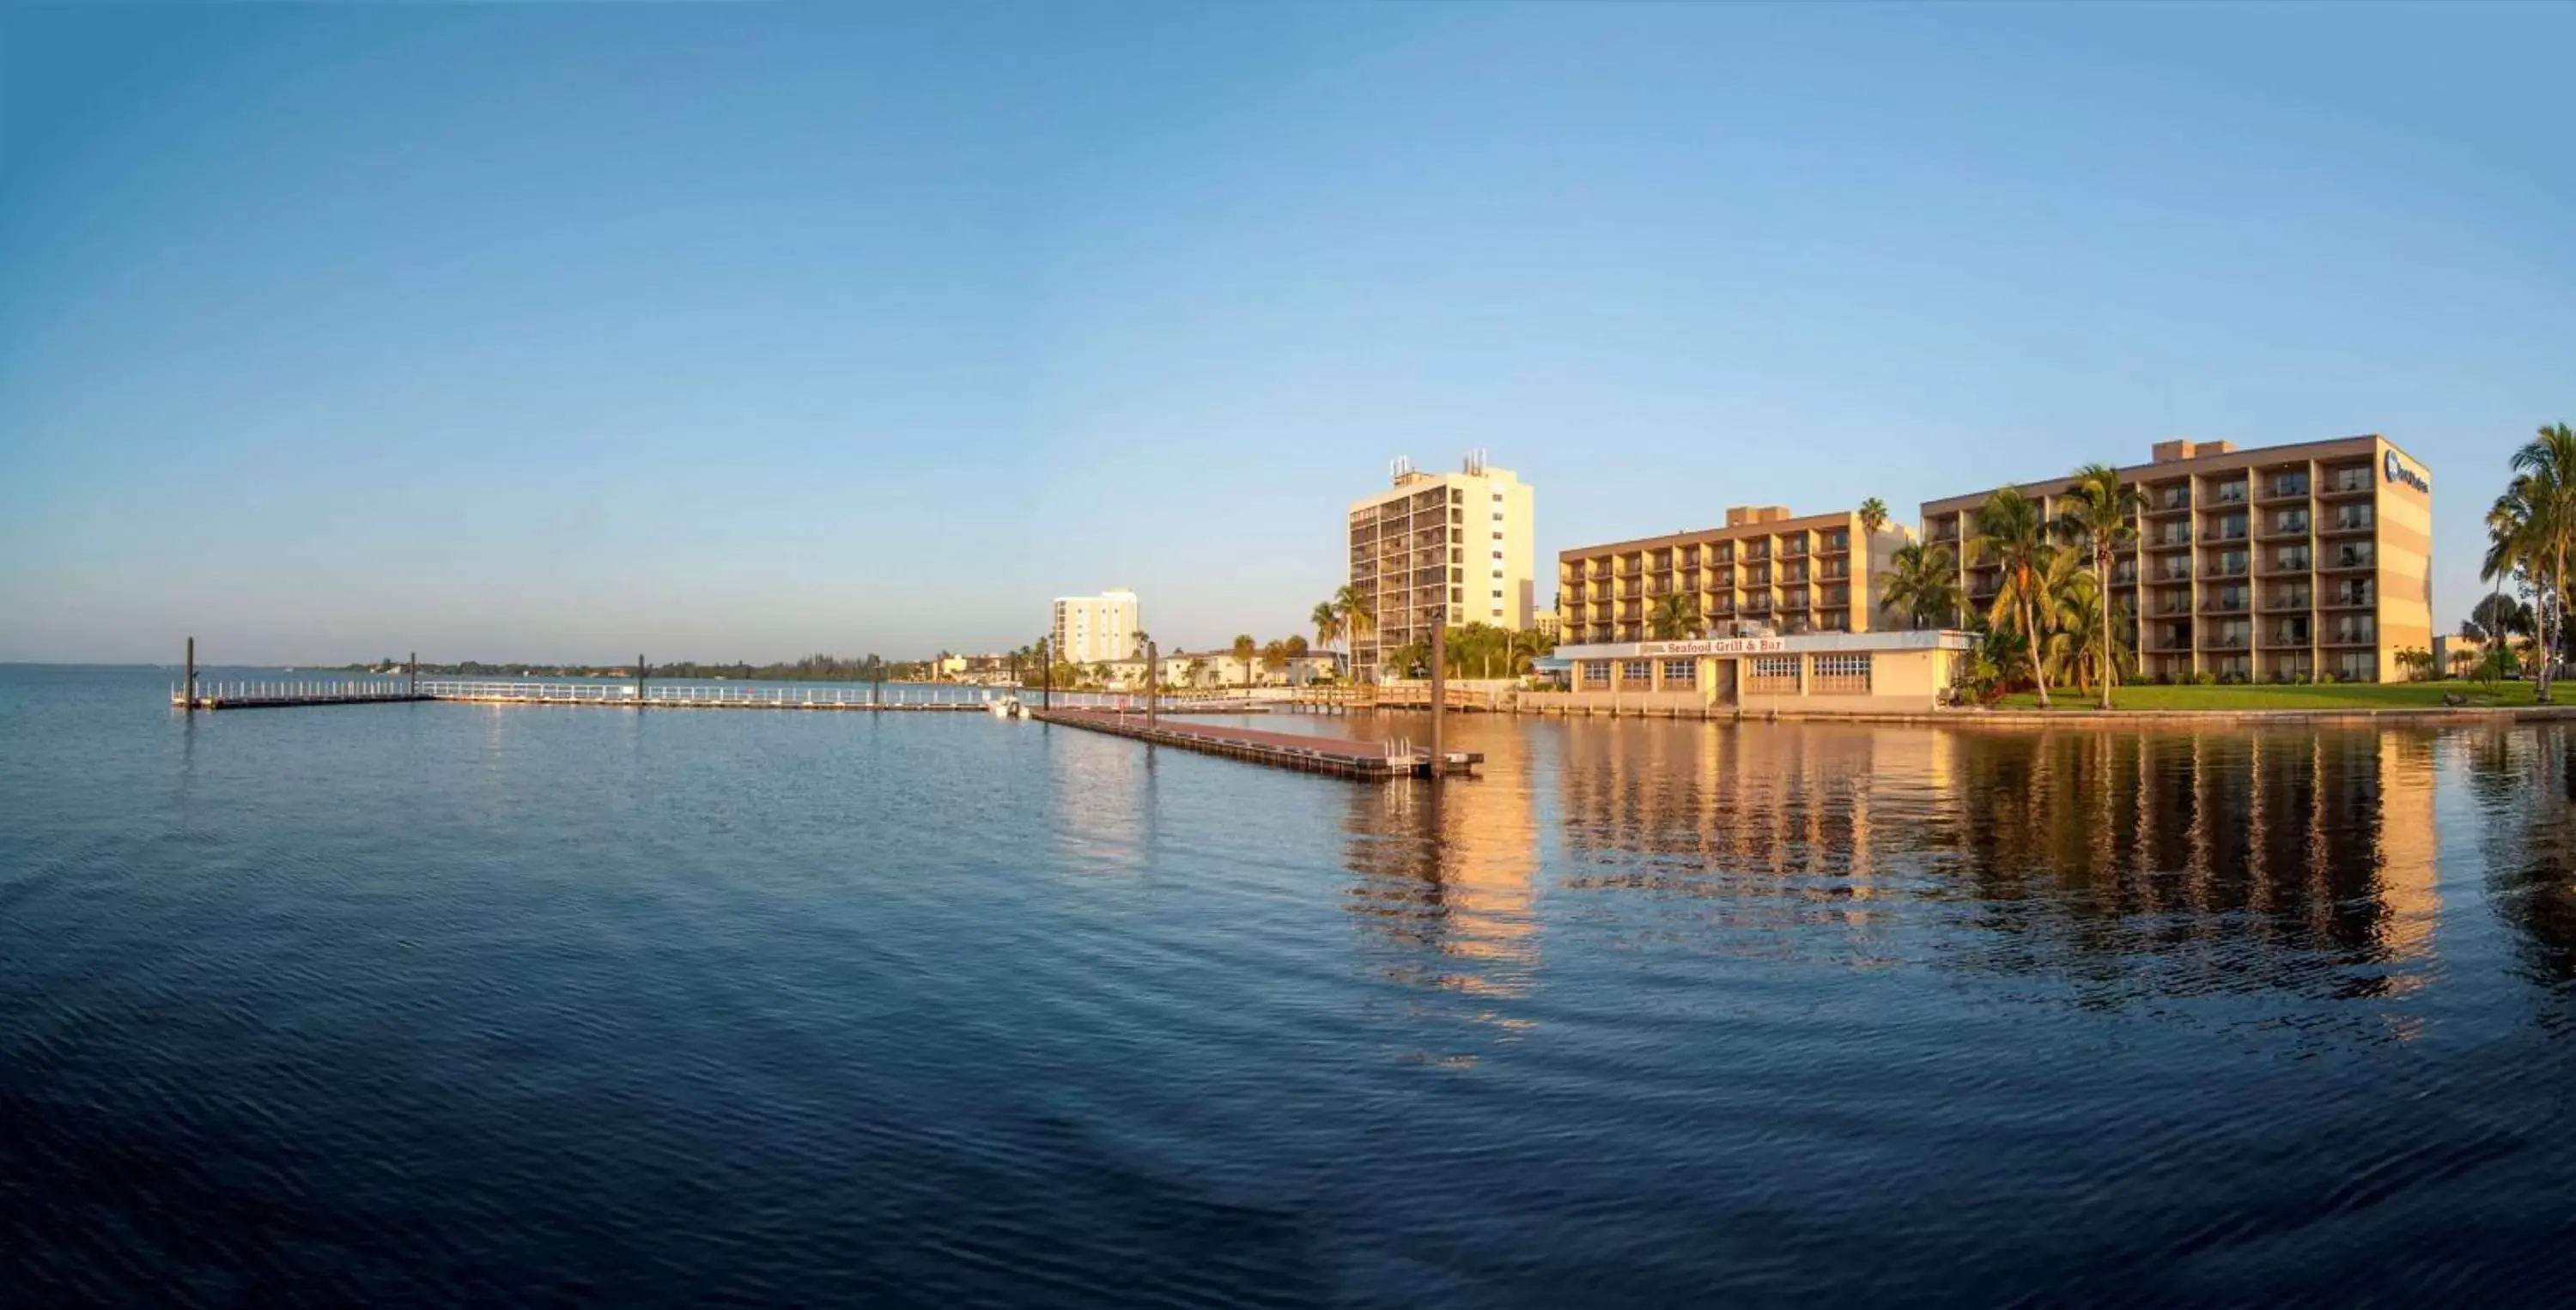 Property building in Best Western Fort Myers Waterfront